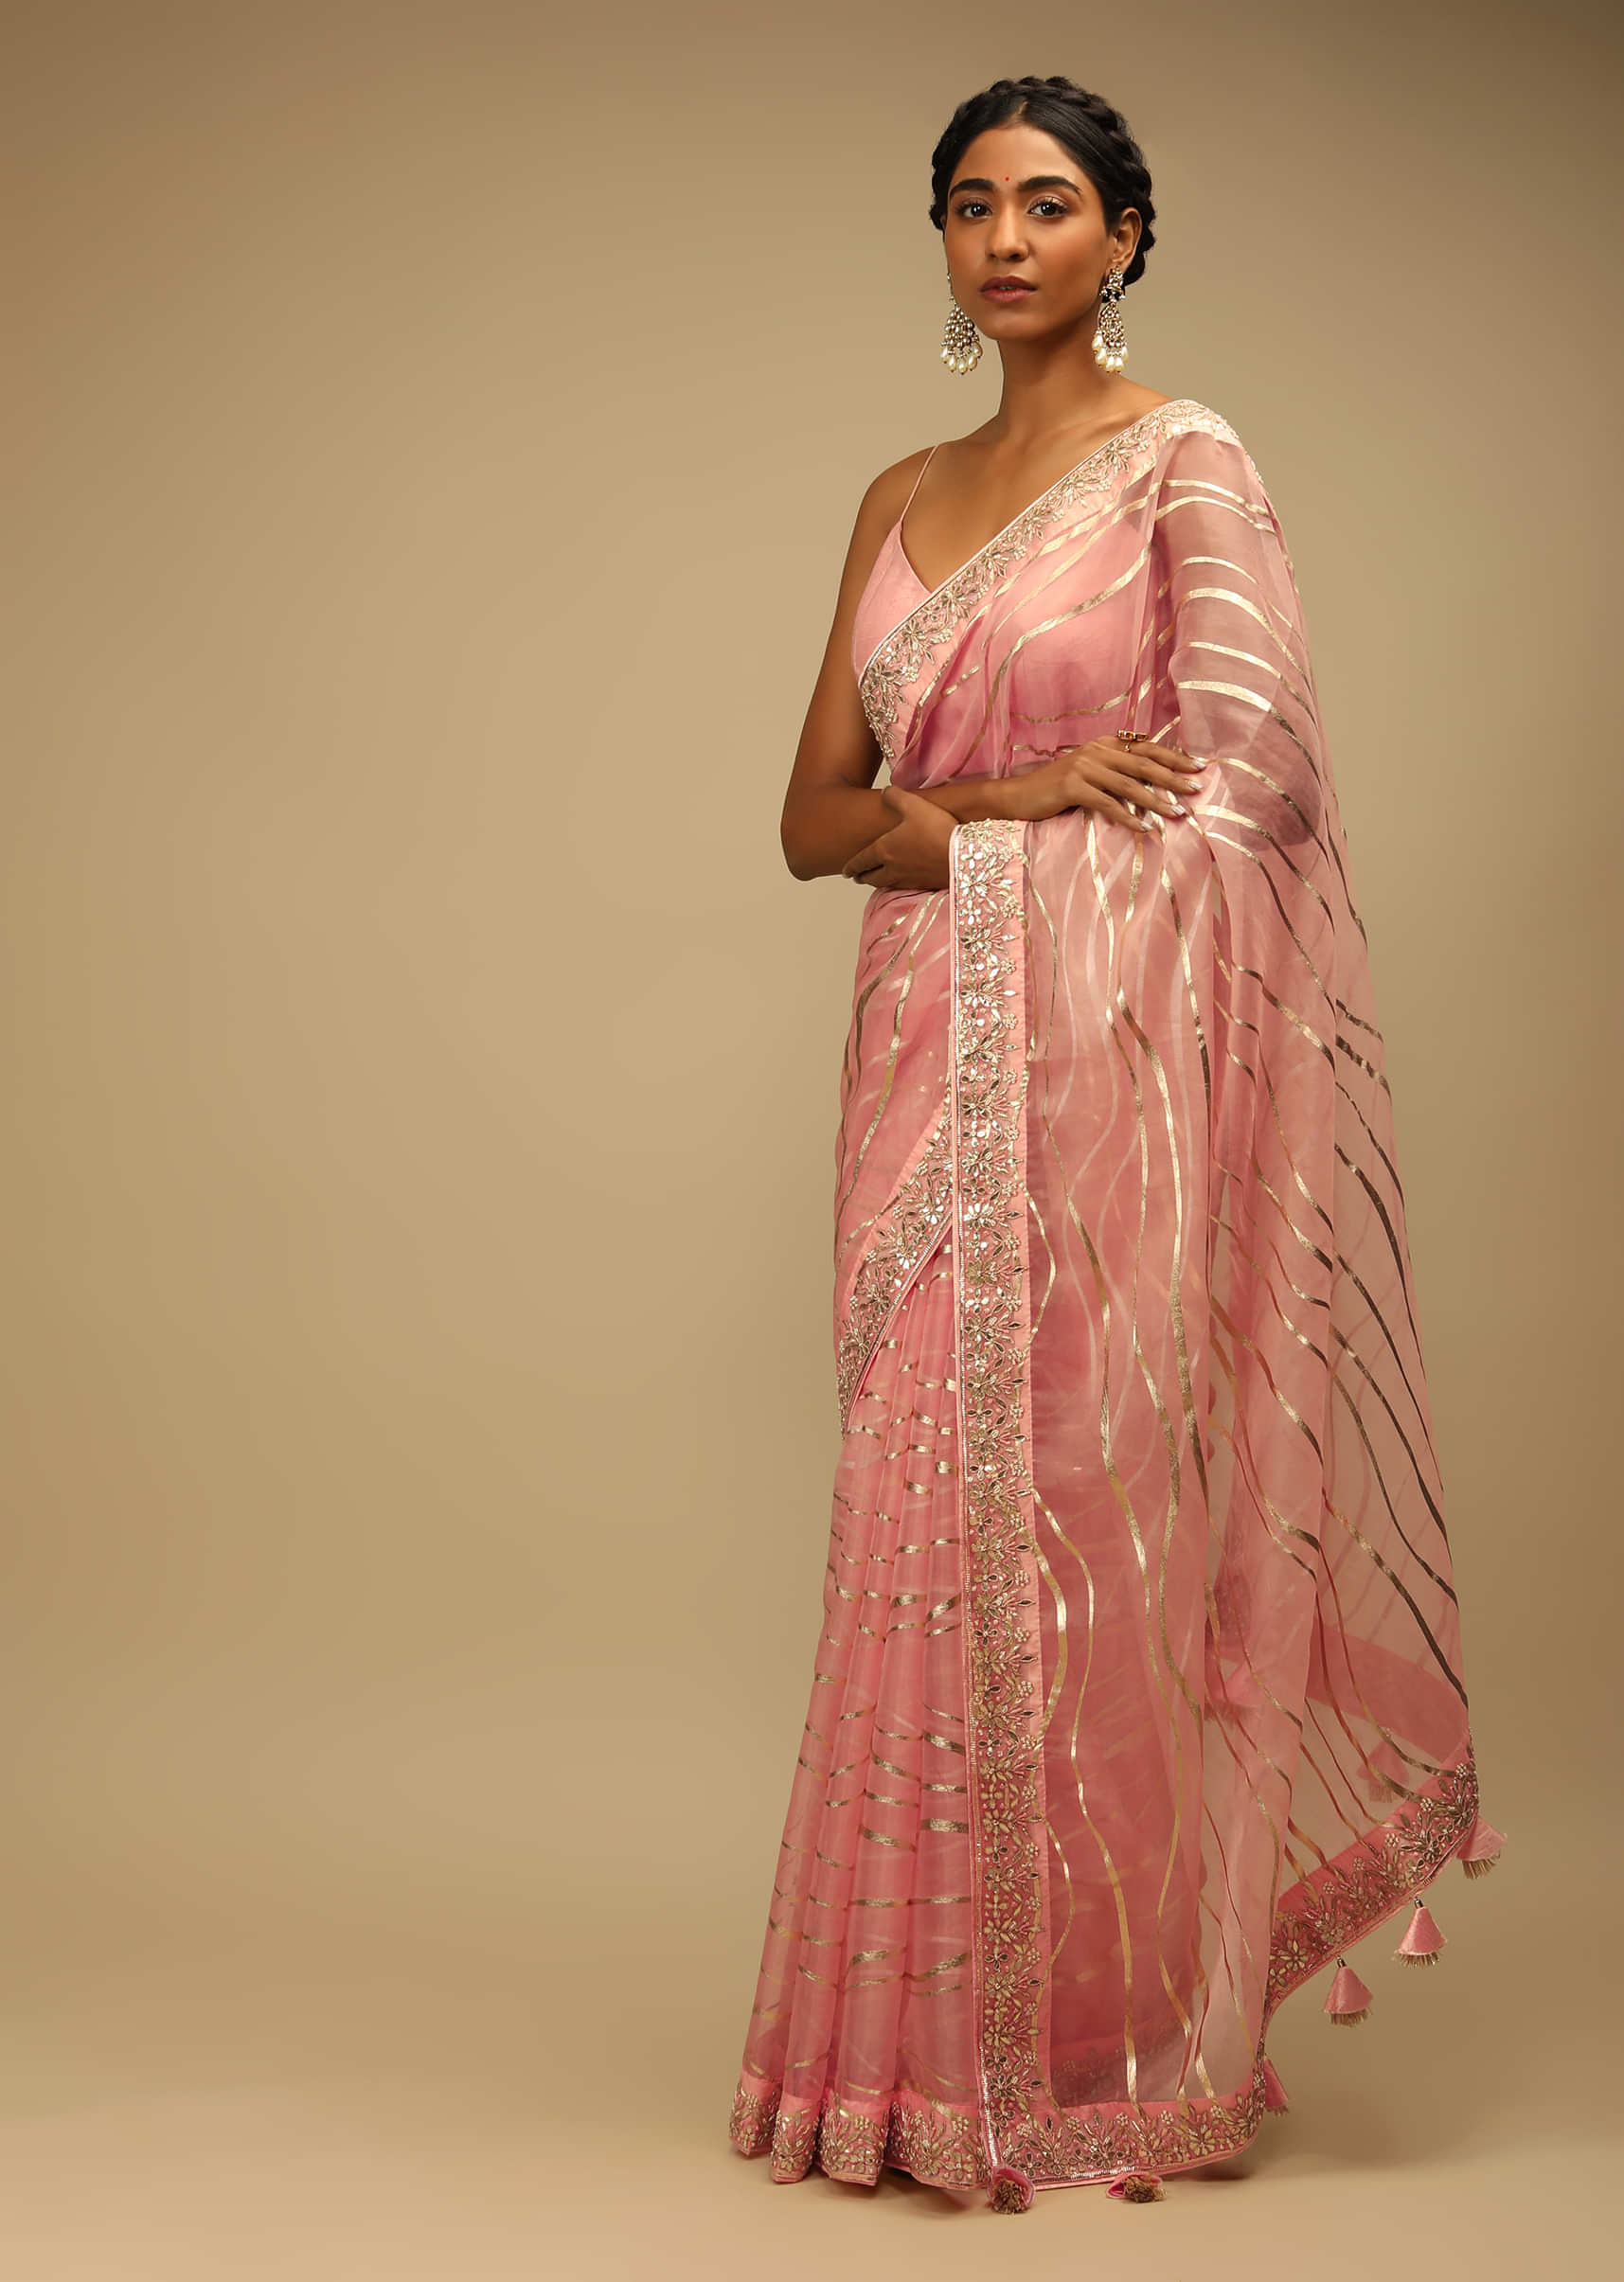 Peach Pink Saree In Organza With Foil Printed Wave Design And Gotta Border